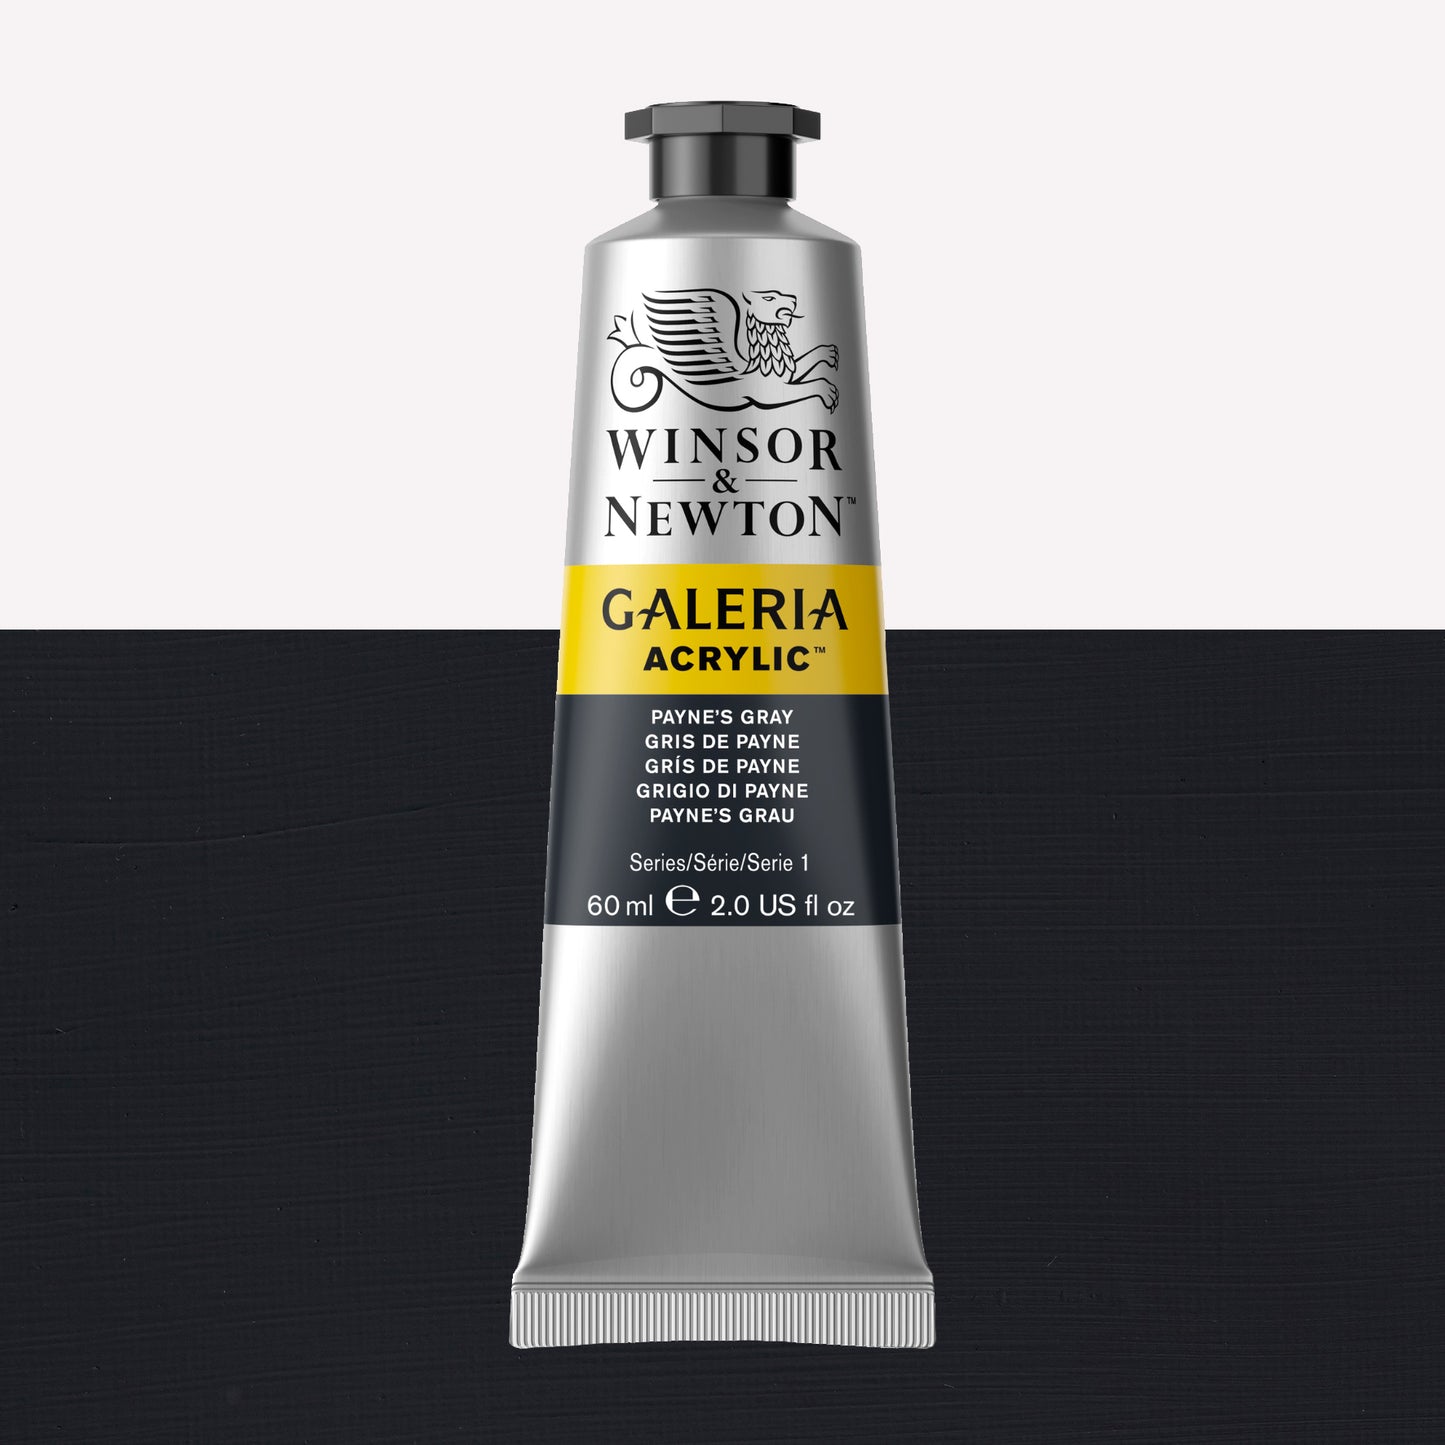 A 60ml tube of vibrant Galeria Acrylic paint in the shade Payne’s Gray. This professional-quality paint is packaged in a silver tube with a black lid. Made by Winsor and Newton.